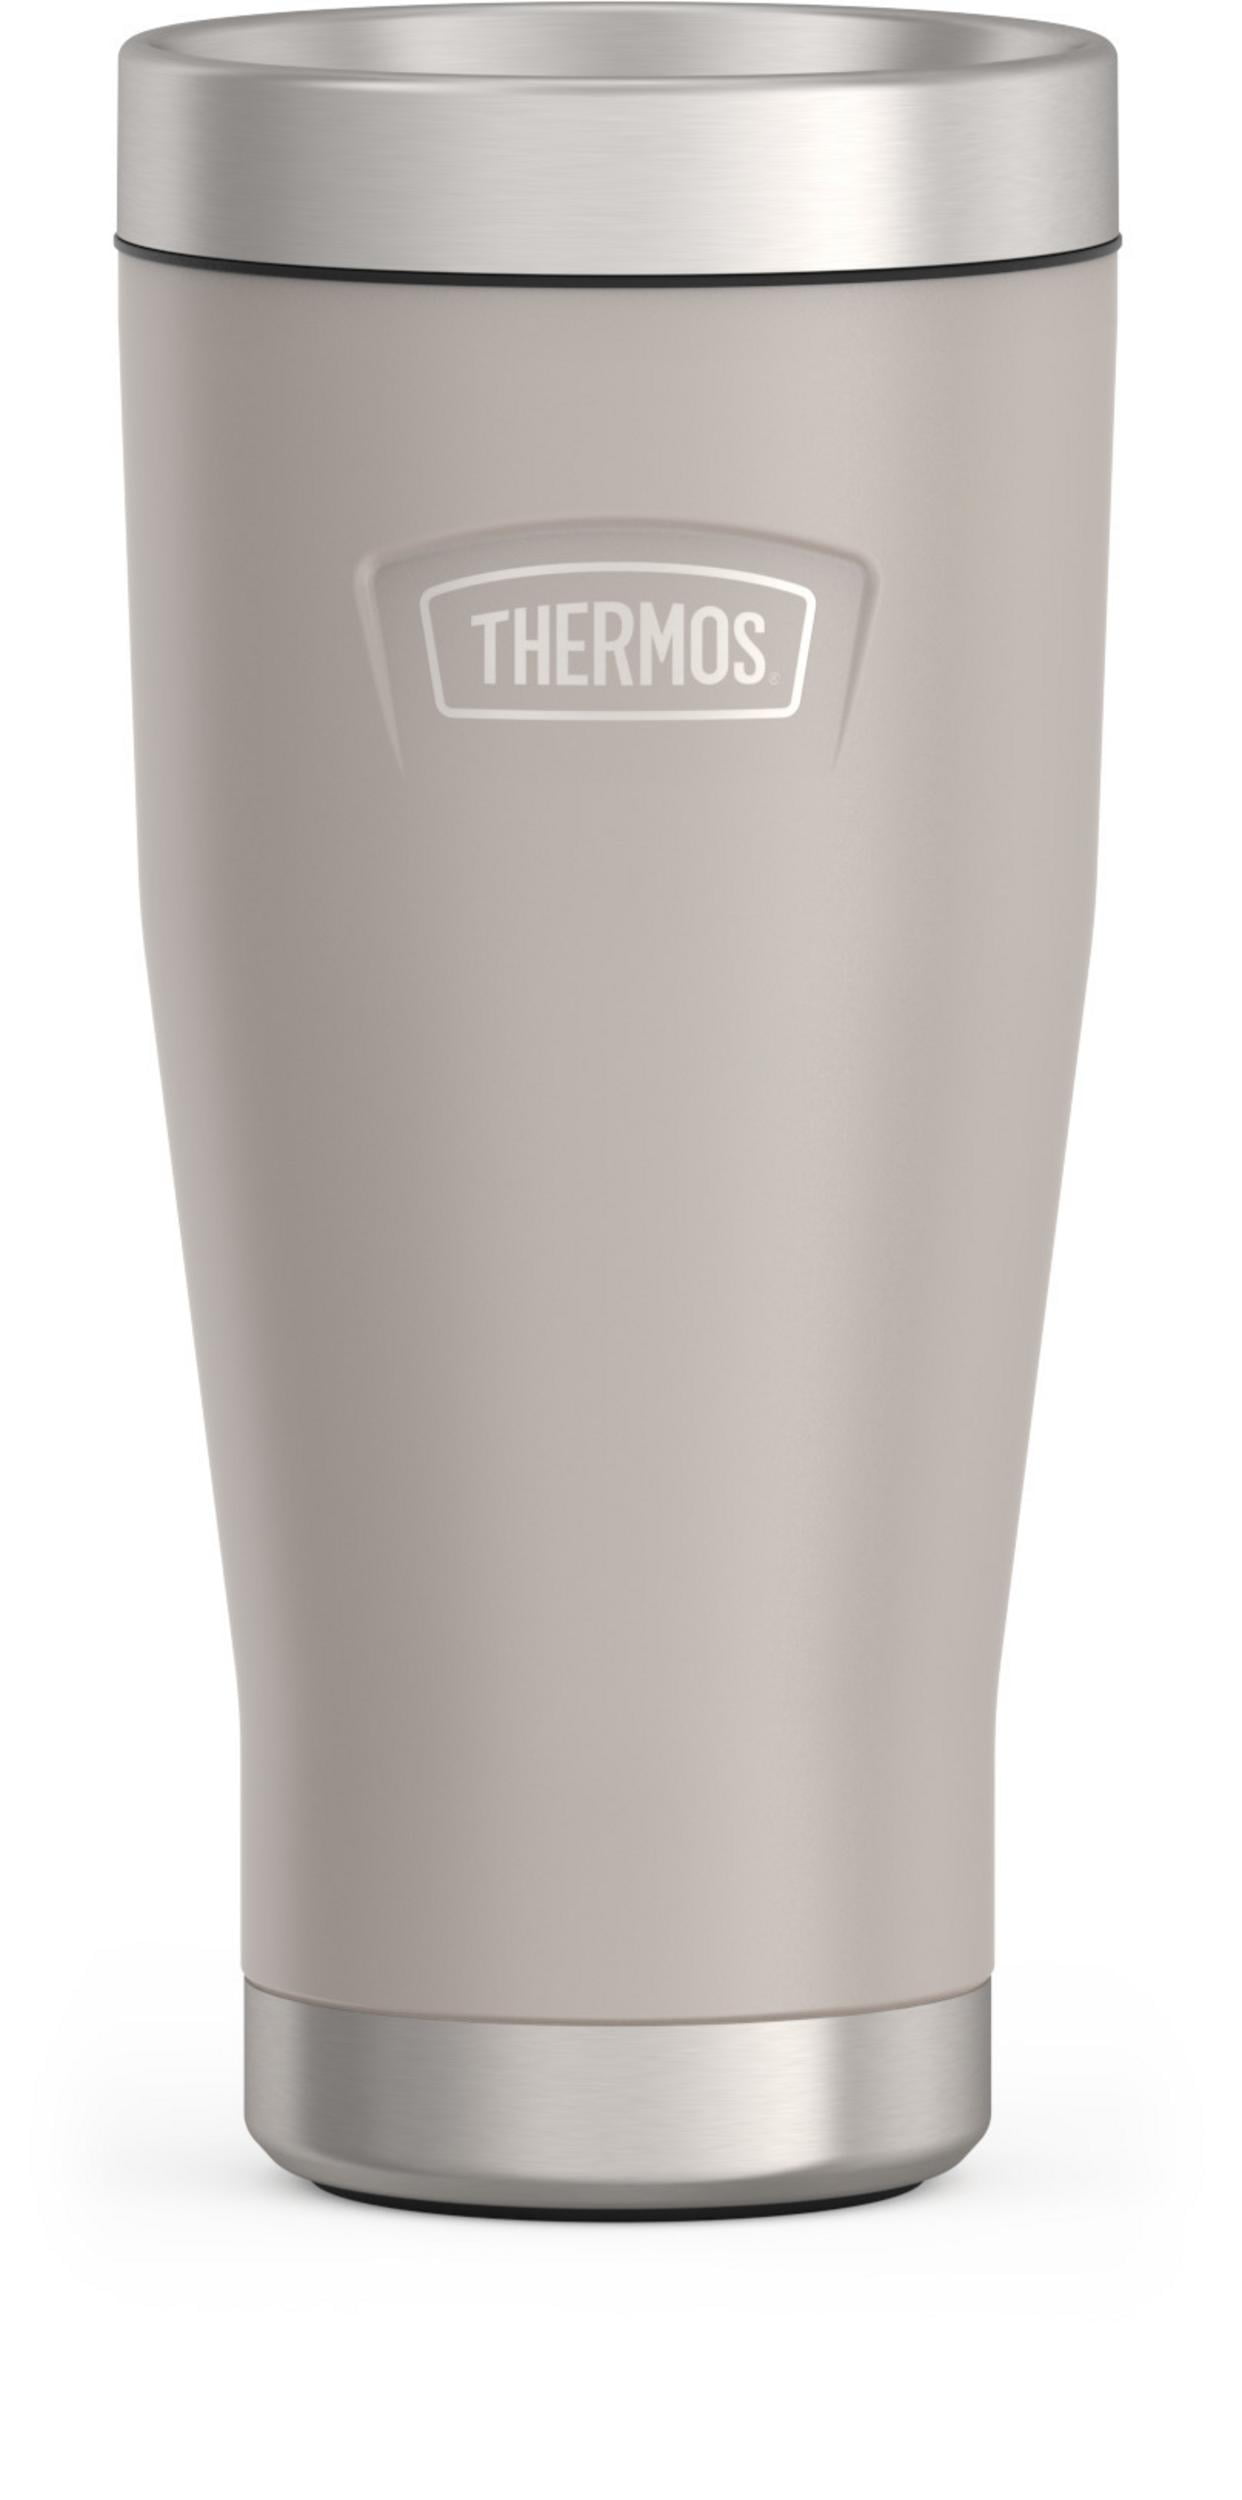 Personalized 16oz Insulated Tumbler, Stainless Steel Thermos 16oz